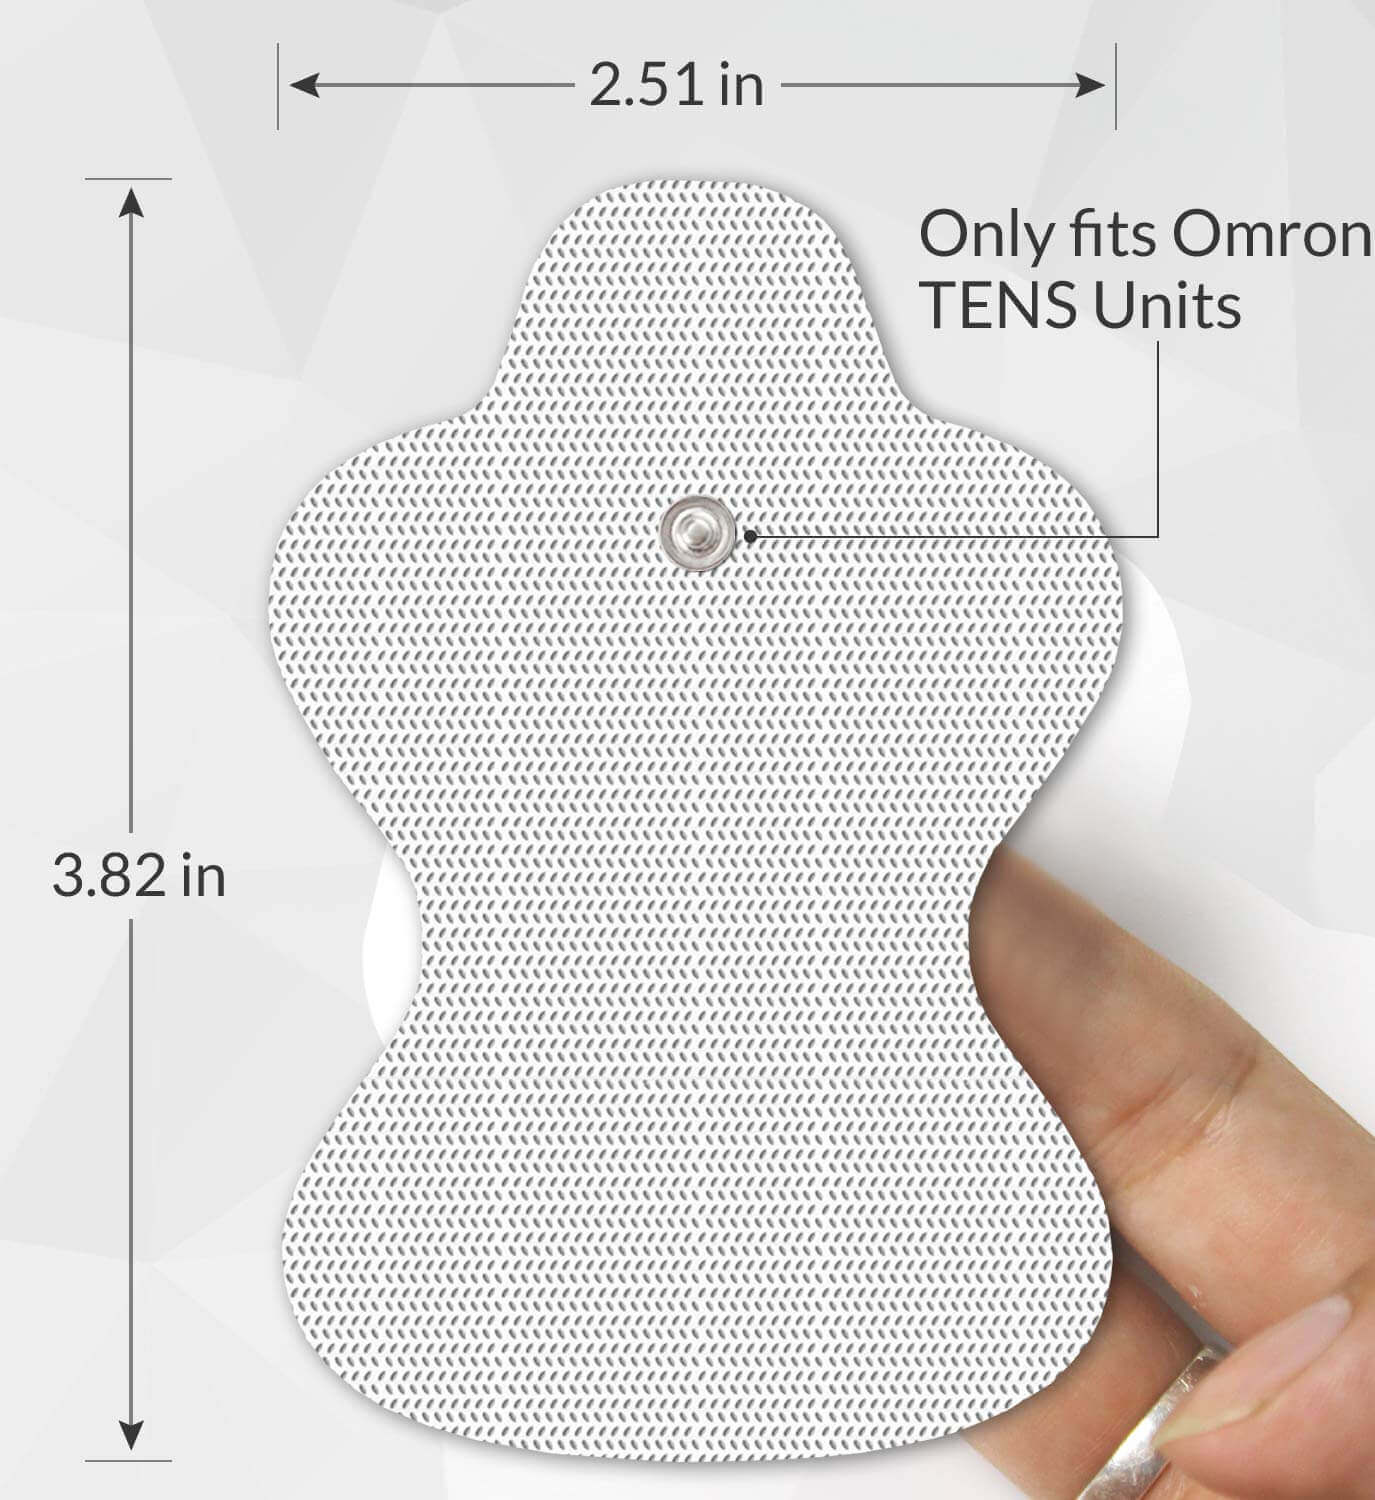 Omron Compatible Replacement Pads for TENS Unit - 20 Pcs - only fits Omron TENS units